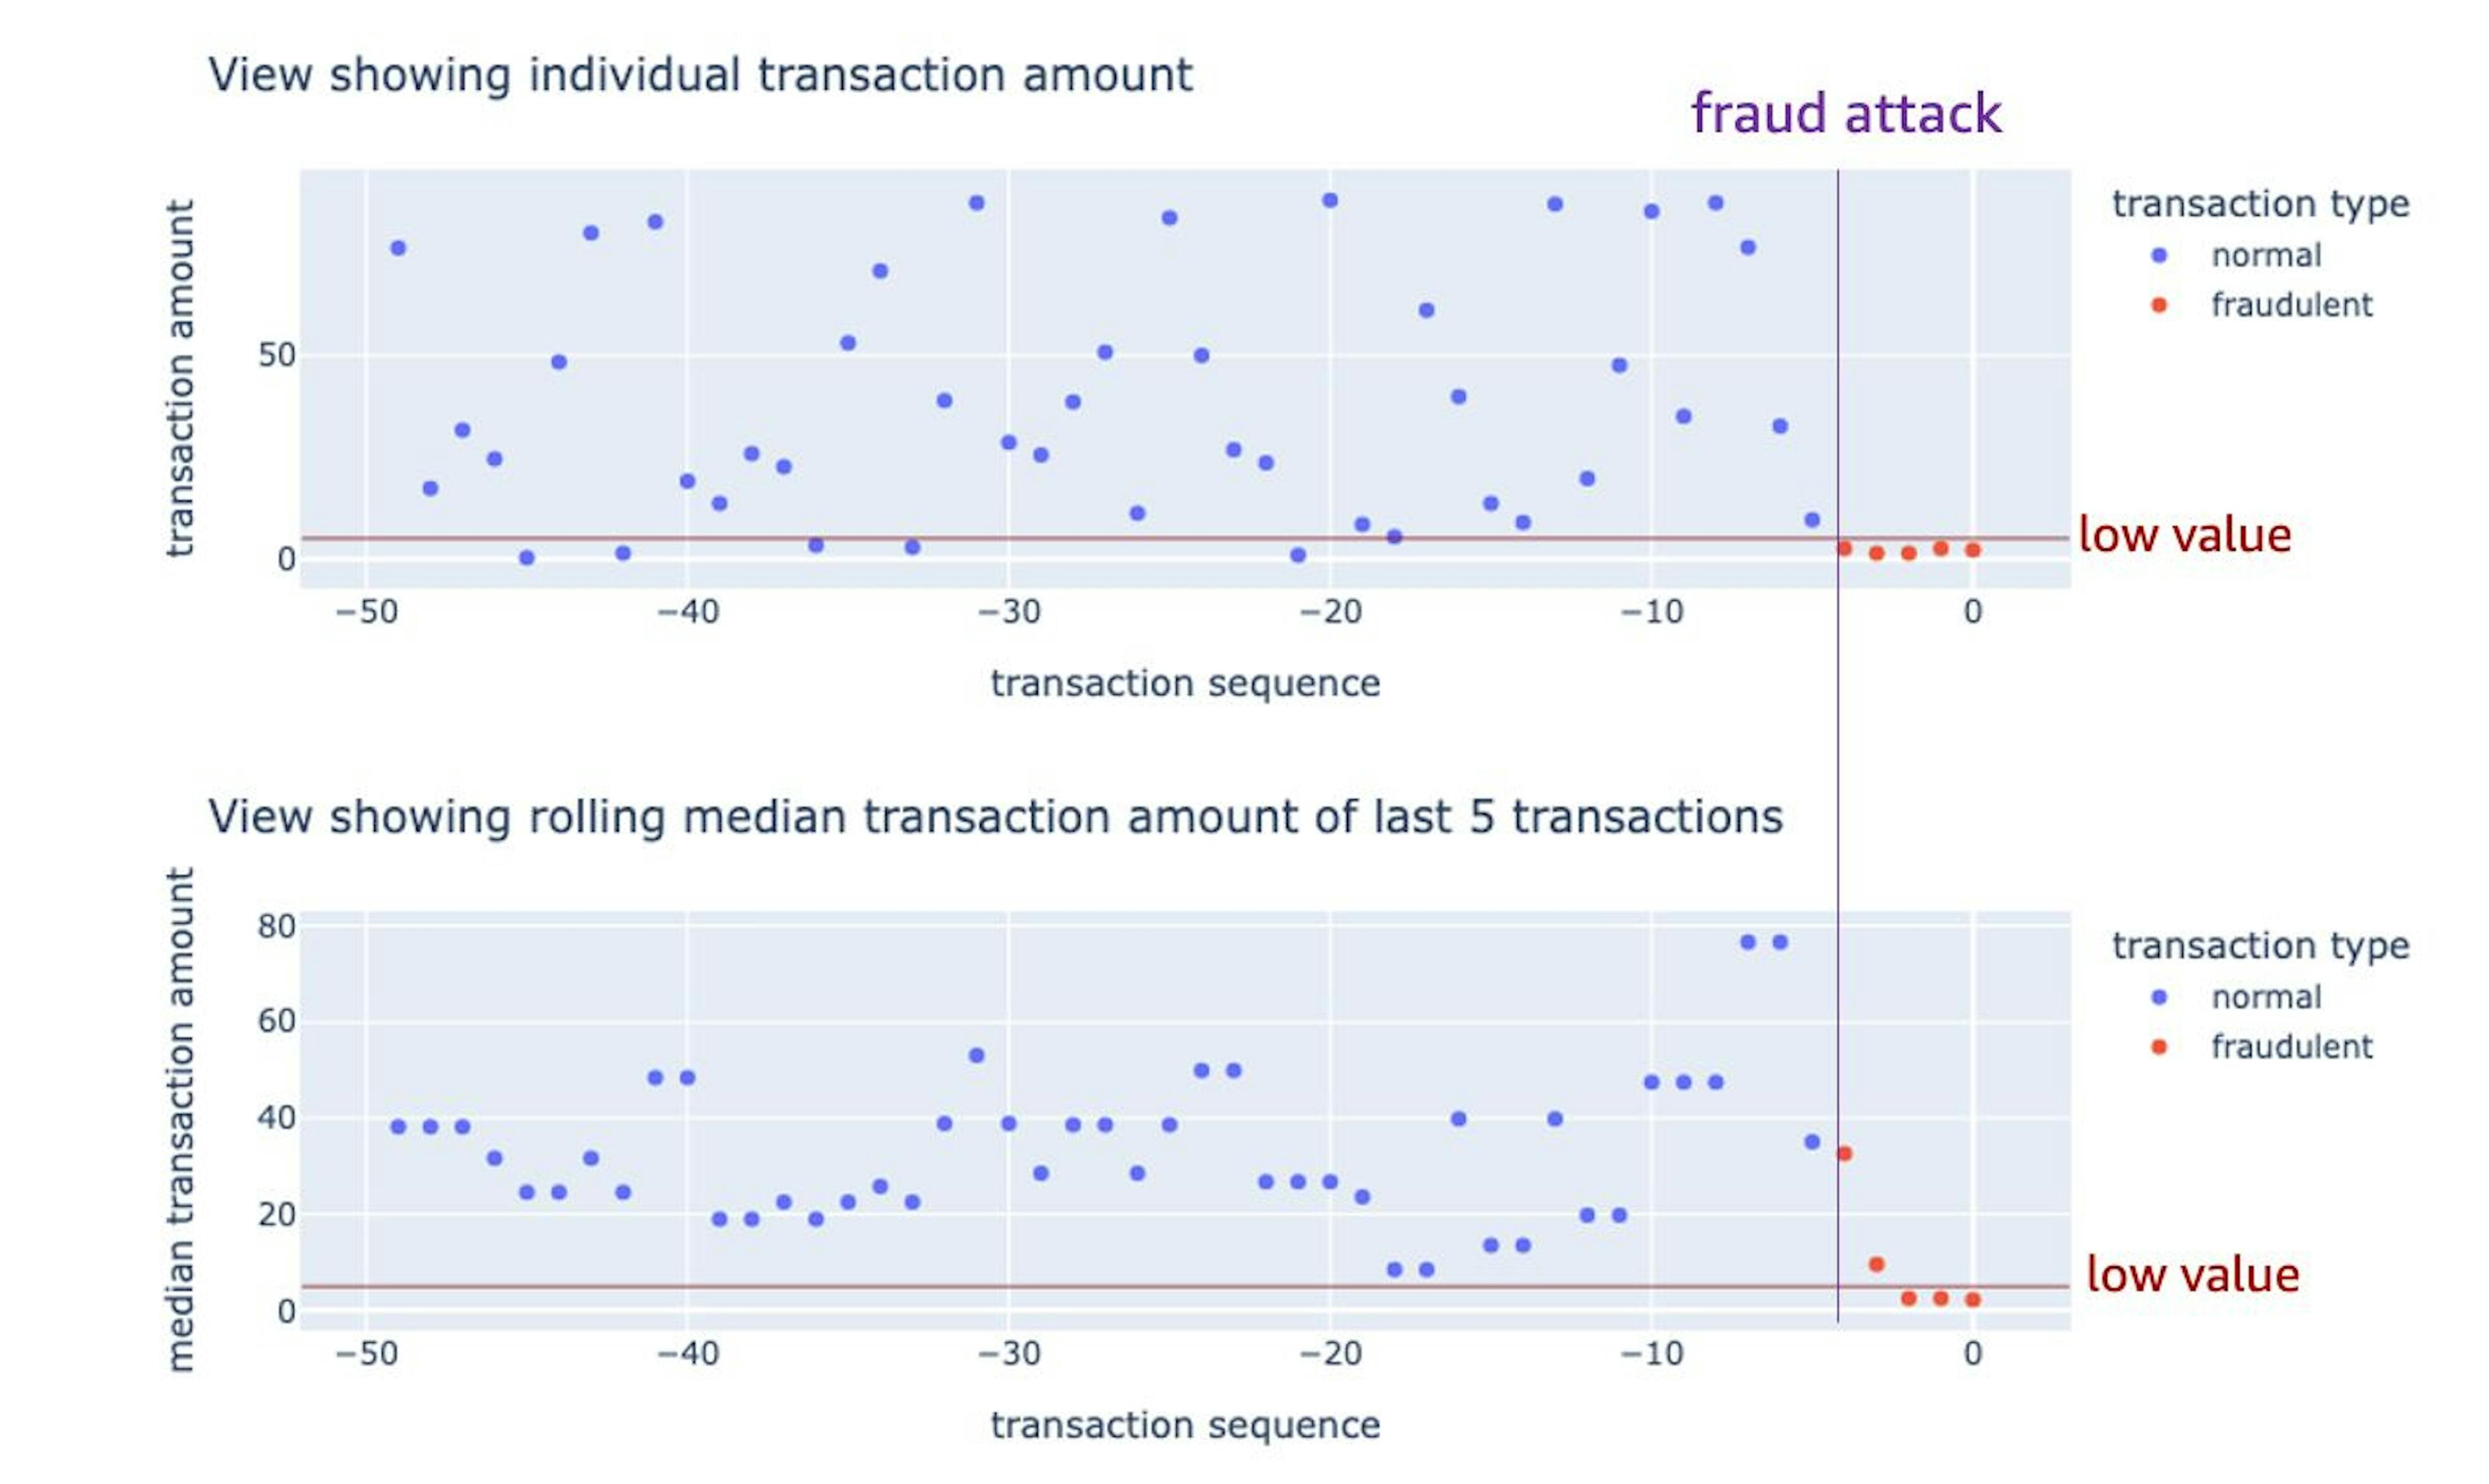 The top chart shows individual transaction amounts and we can see that isolated low-value transactions are not uncommon and do not indicate fraud, however, multiple successive low-value transactions are a sign of fraud. The bottom chart shows a rolling median of last five transaction amounts and only returns a low value if there is a pattern of multiple successive low-value transactions. In this case, the bottom aggregated view makes it possible to distinguish between legitimate low-value transactions and fraudulent low-value transactions using transaction amount as a feature.